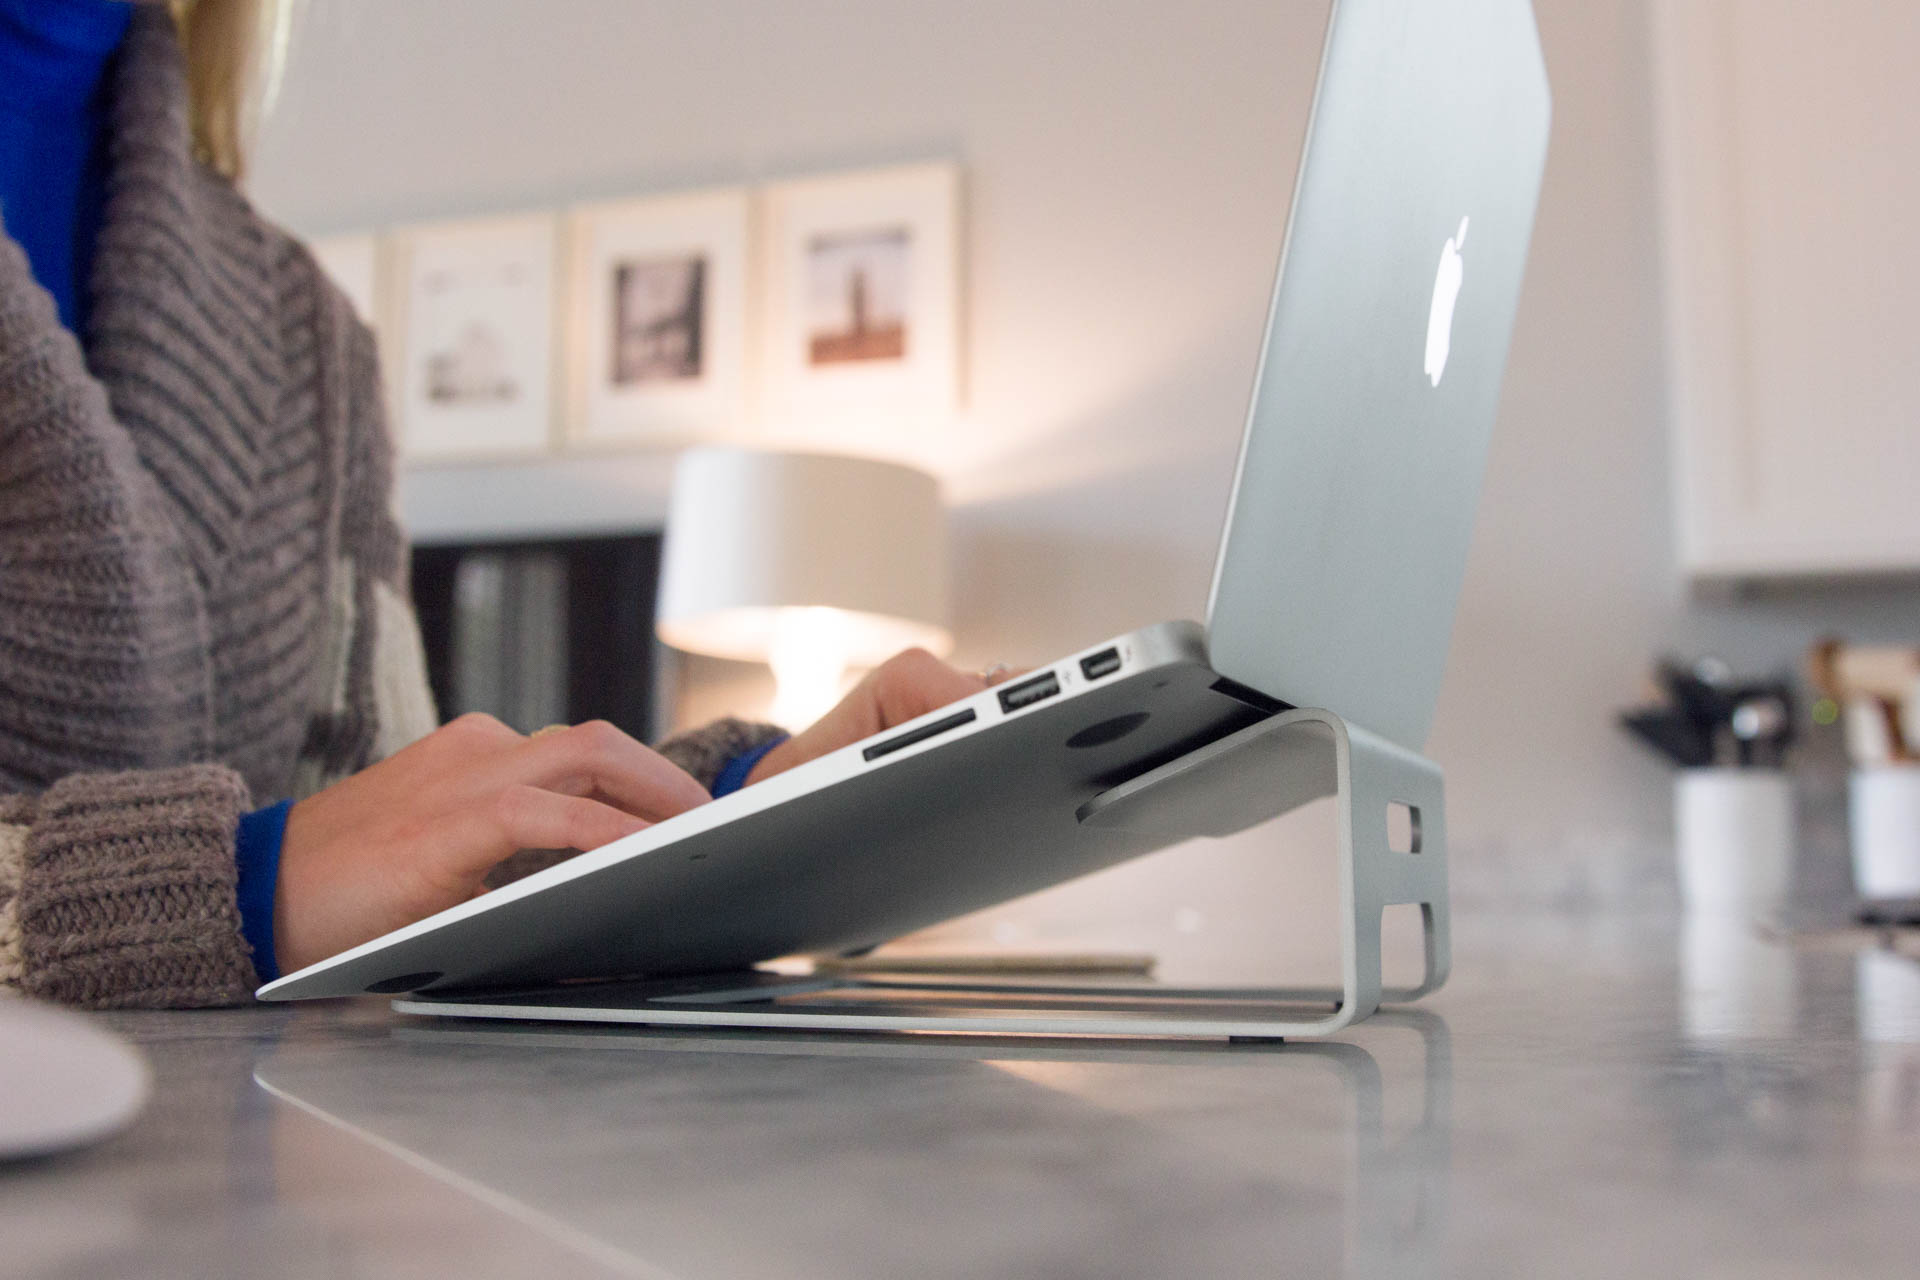 For maximum comfort in the writing saddle, make sure your keyboard is at the proper angle and height. Consider a laptop stand, such as the Twelve South ParcSlope. Image: Twelve South.